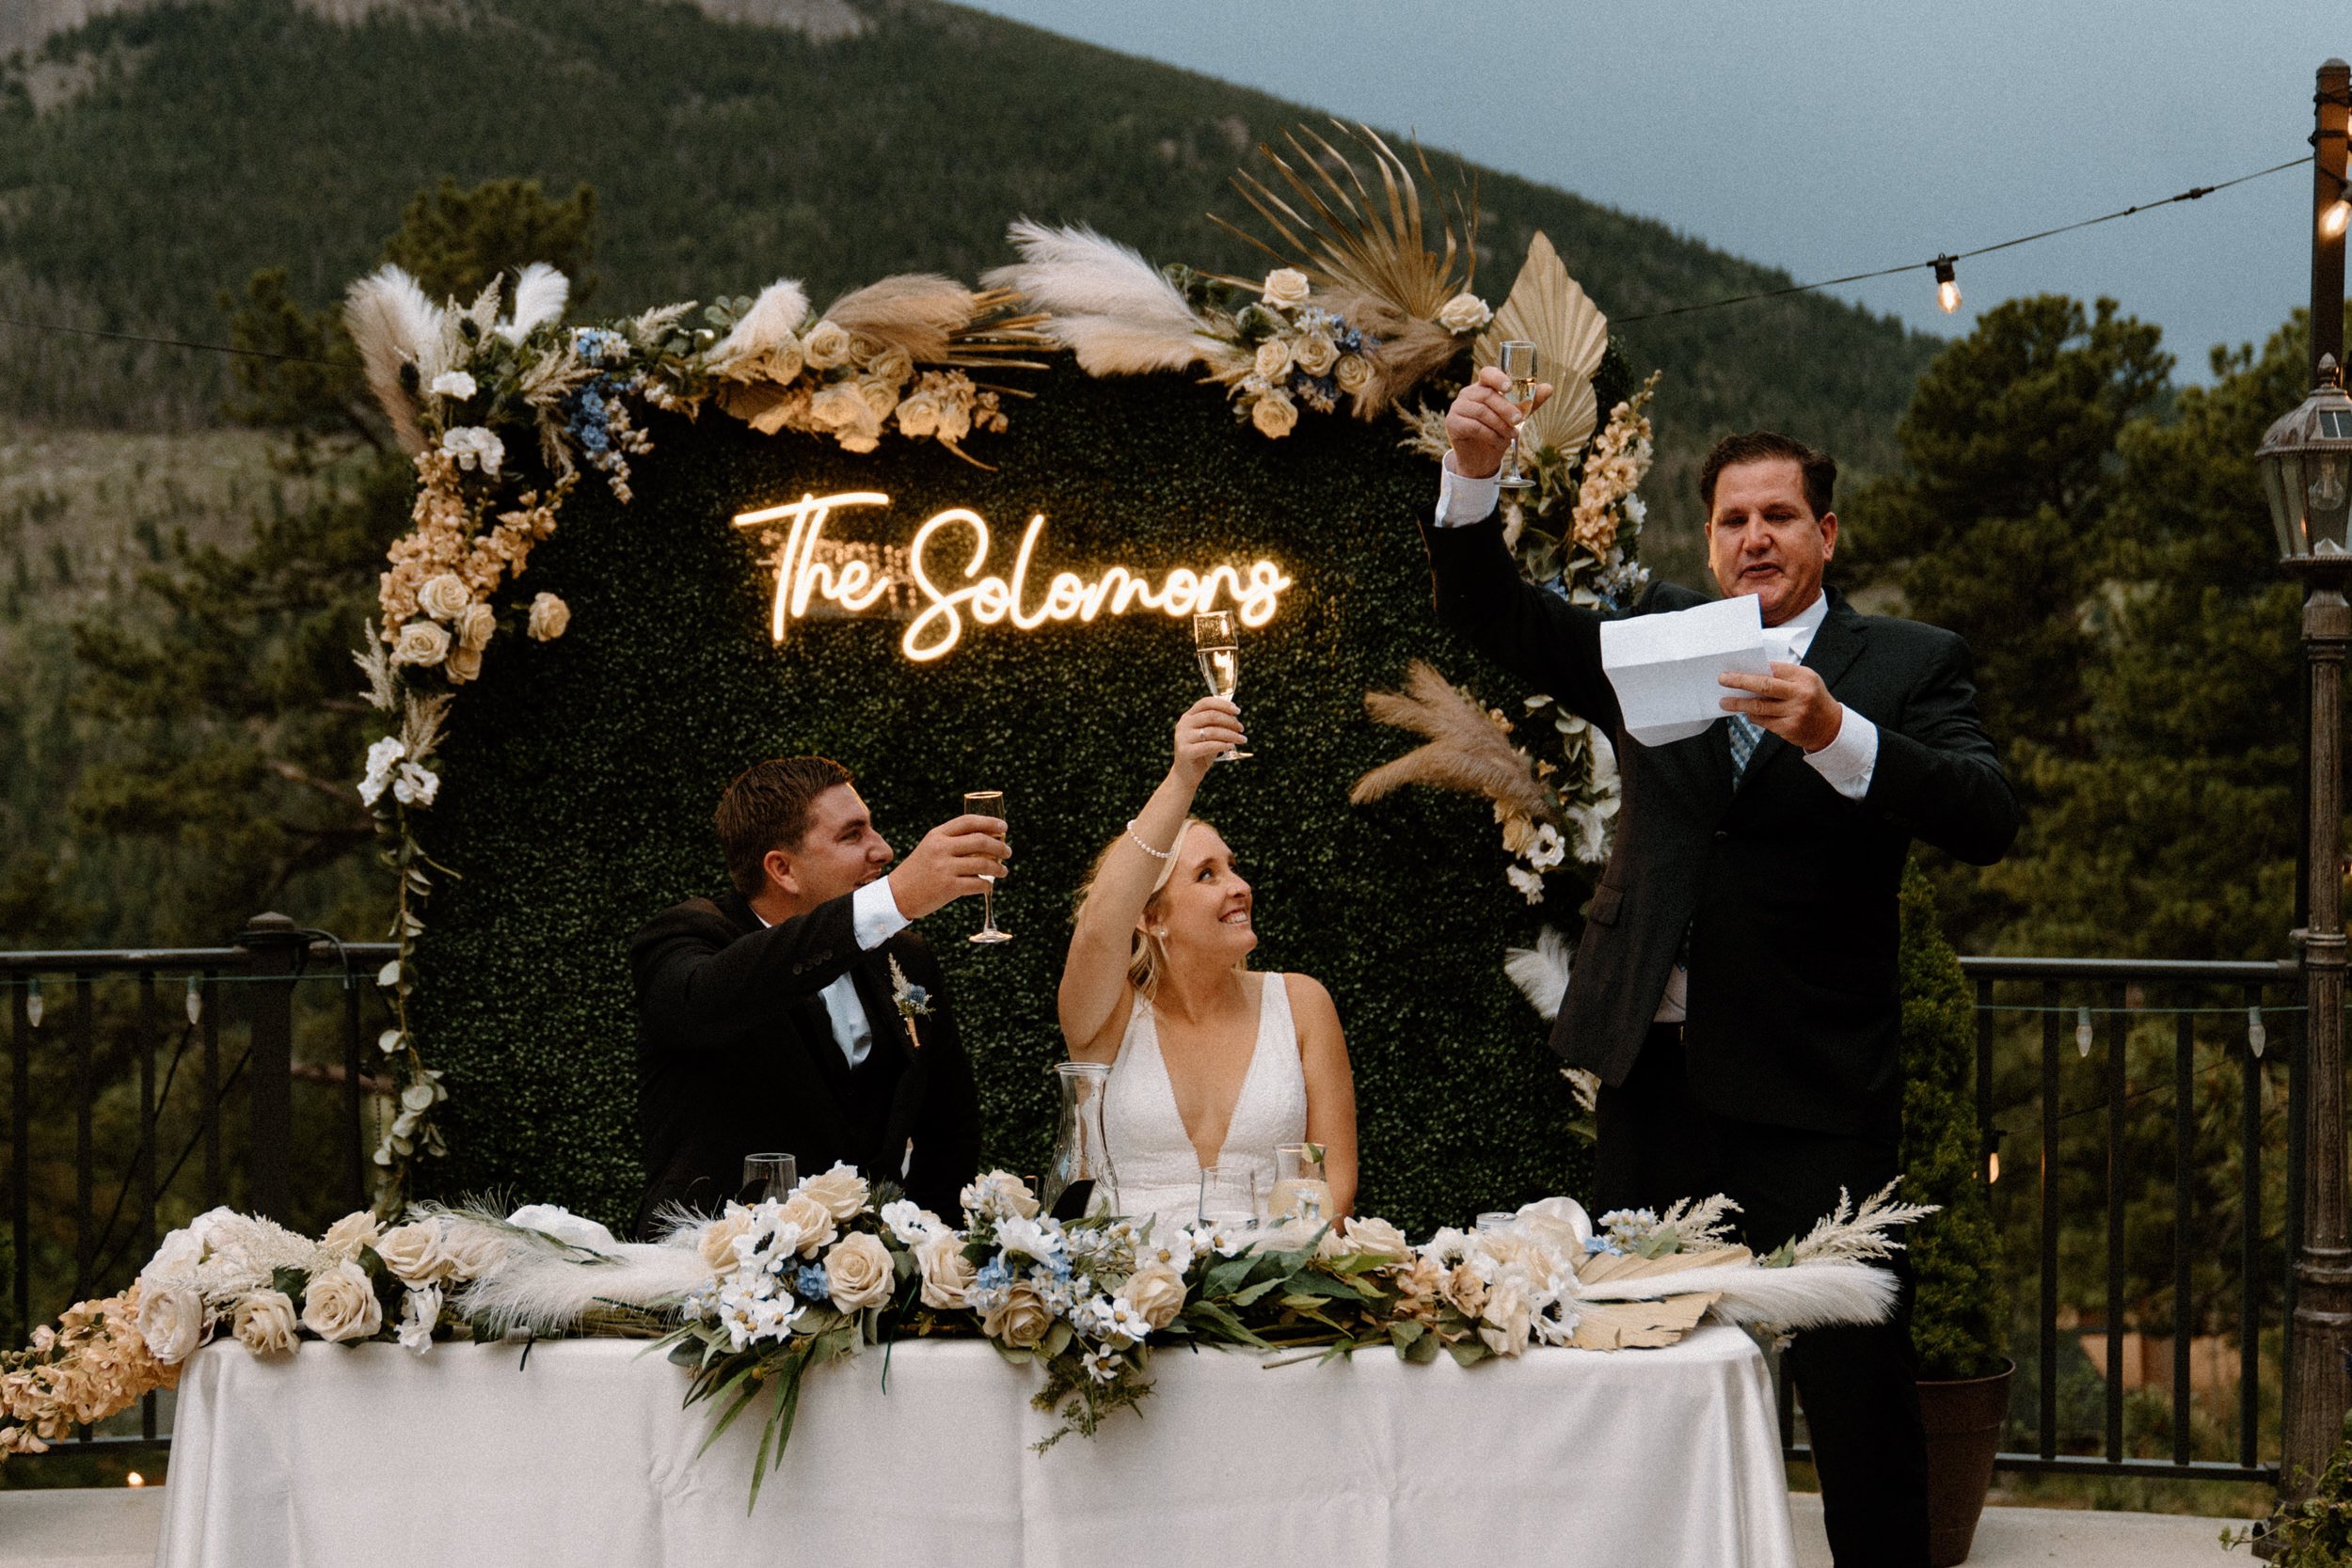 A groomsmen gives a toast to the couple as they raise their glasses